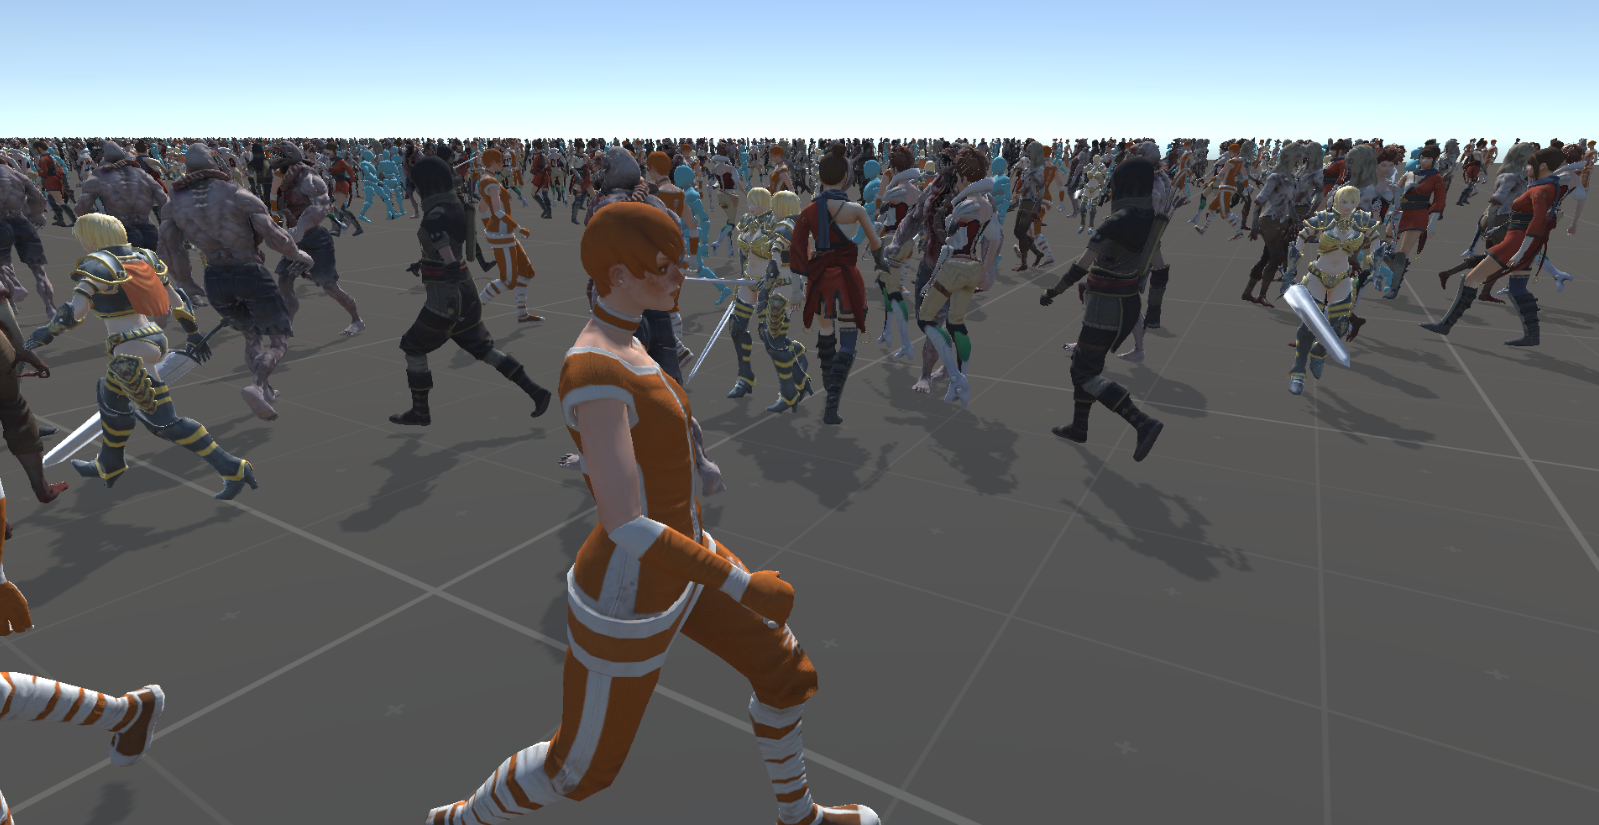 GitHub - mkrebser/GPUInstance: Instancing & Animation library for Unity3D